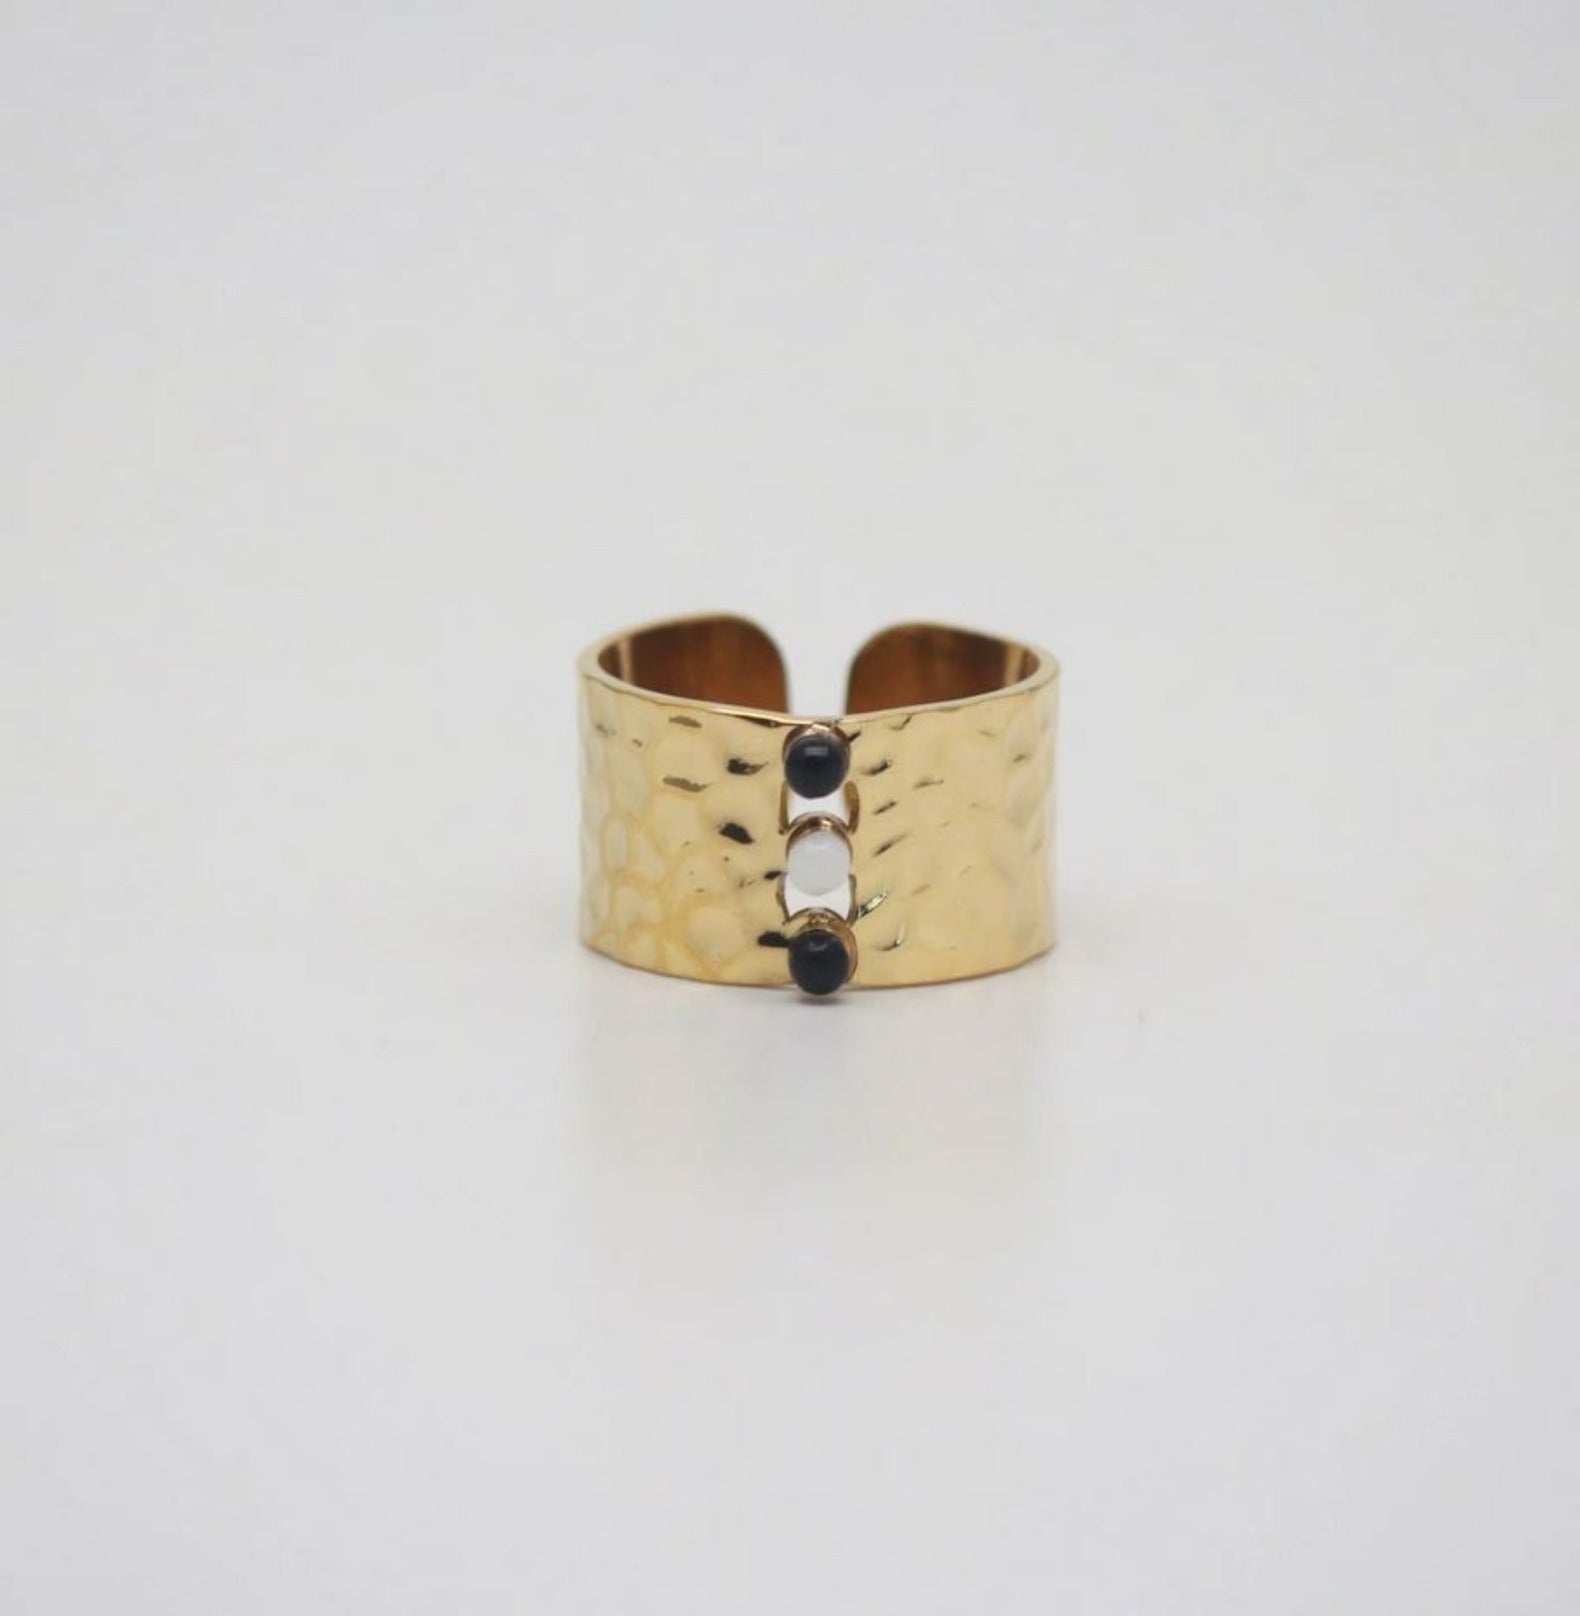 DAINTY RING earing Yubama Jewelry Online Store - The Elegant Designs of Gold and Silver ! Black 